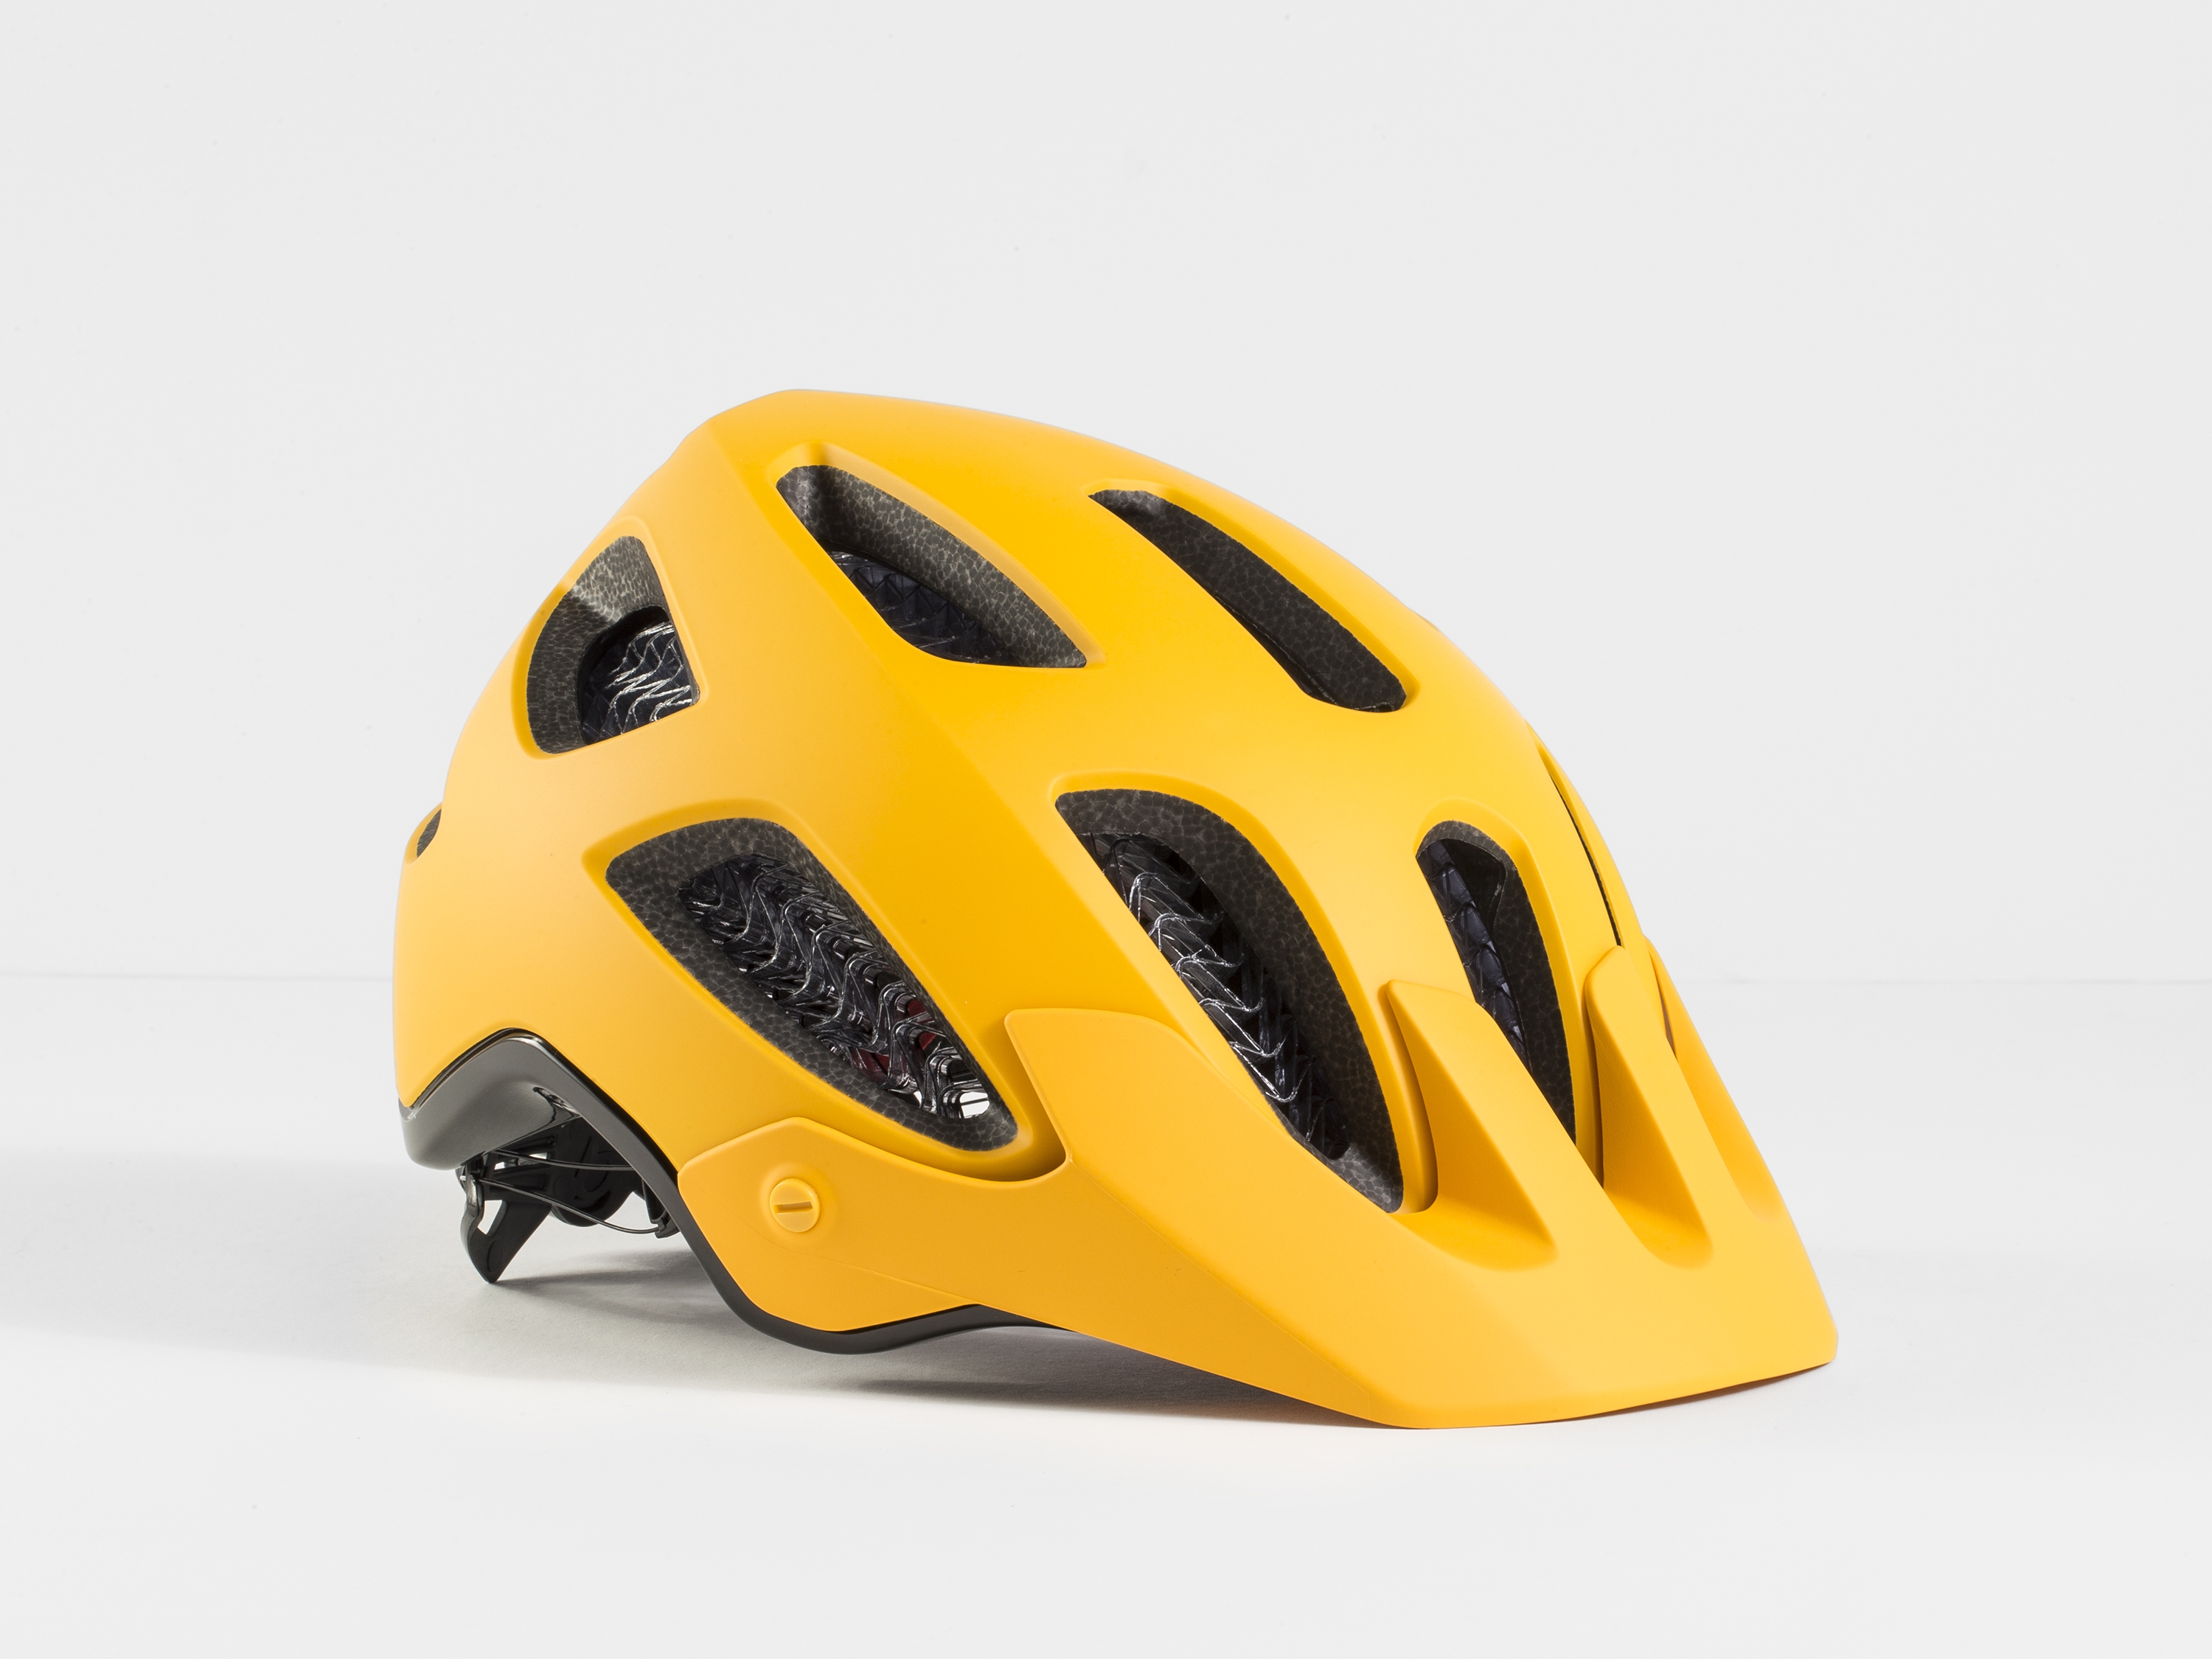 <a href="https://cycles-clement.be/product/casque-bont-rally-wavecel-large-marigold-blac/">CASQUE BONT RALLY WAVECEL LARGE MARIGOLD/BLAC</a>